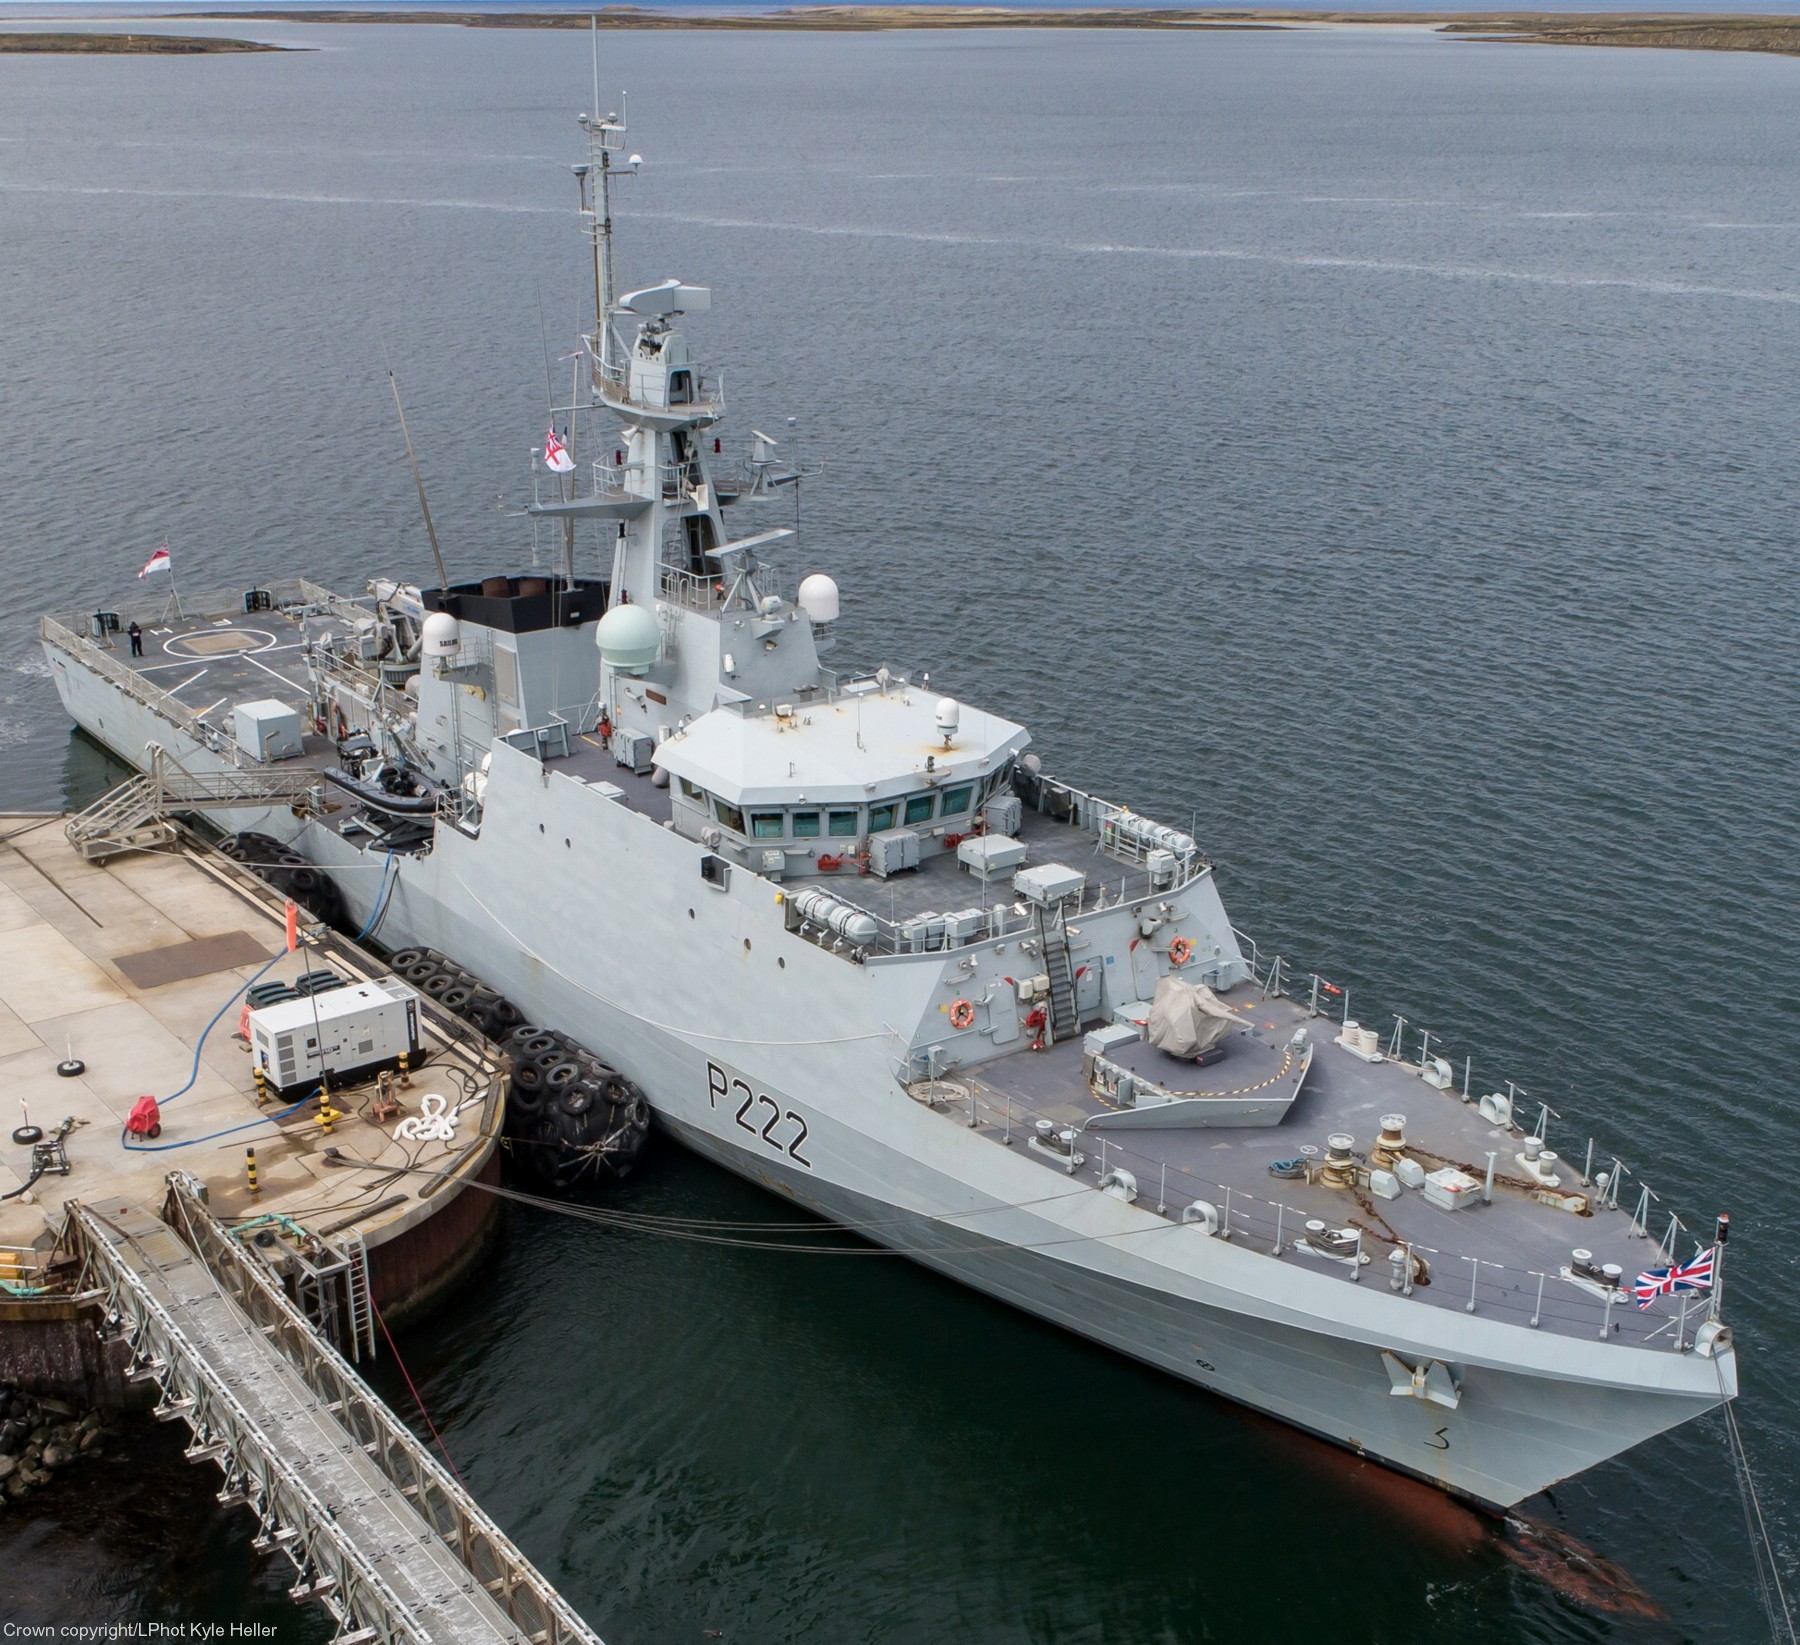 p-222 hms forth river class offshore patrol vessel opv royal navy 16